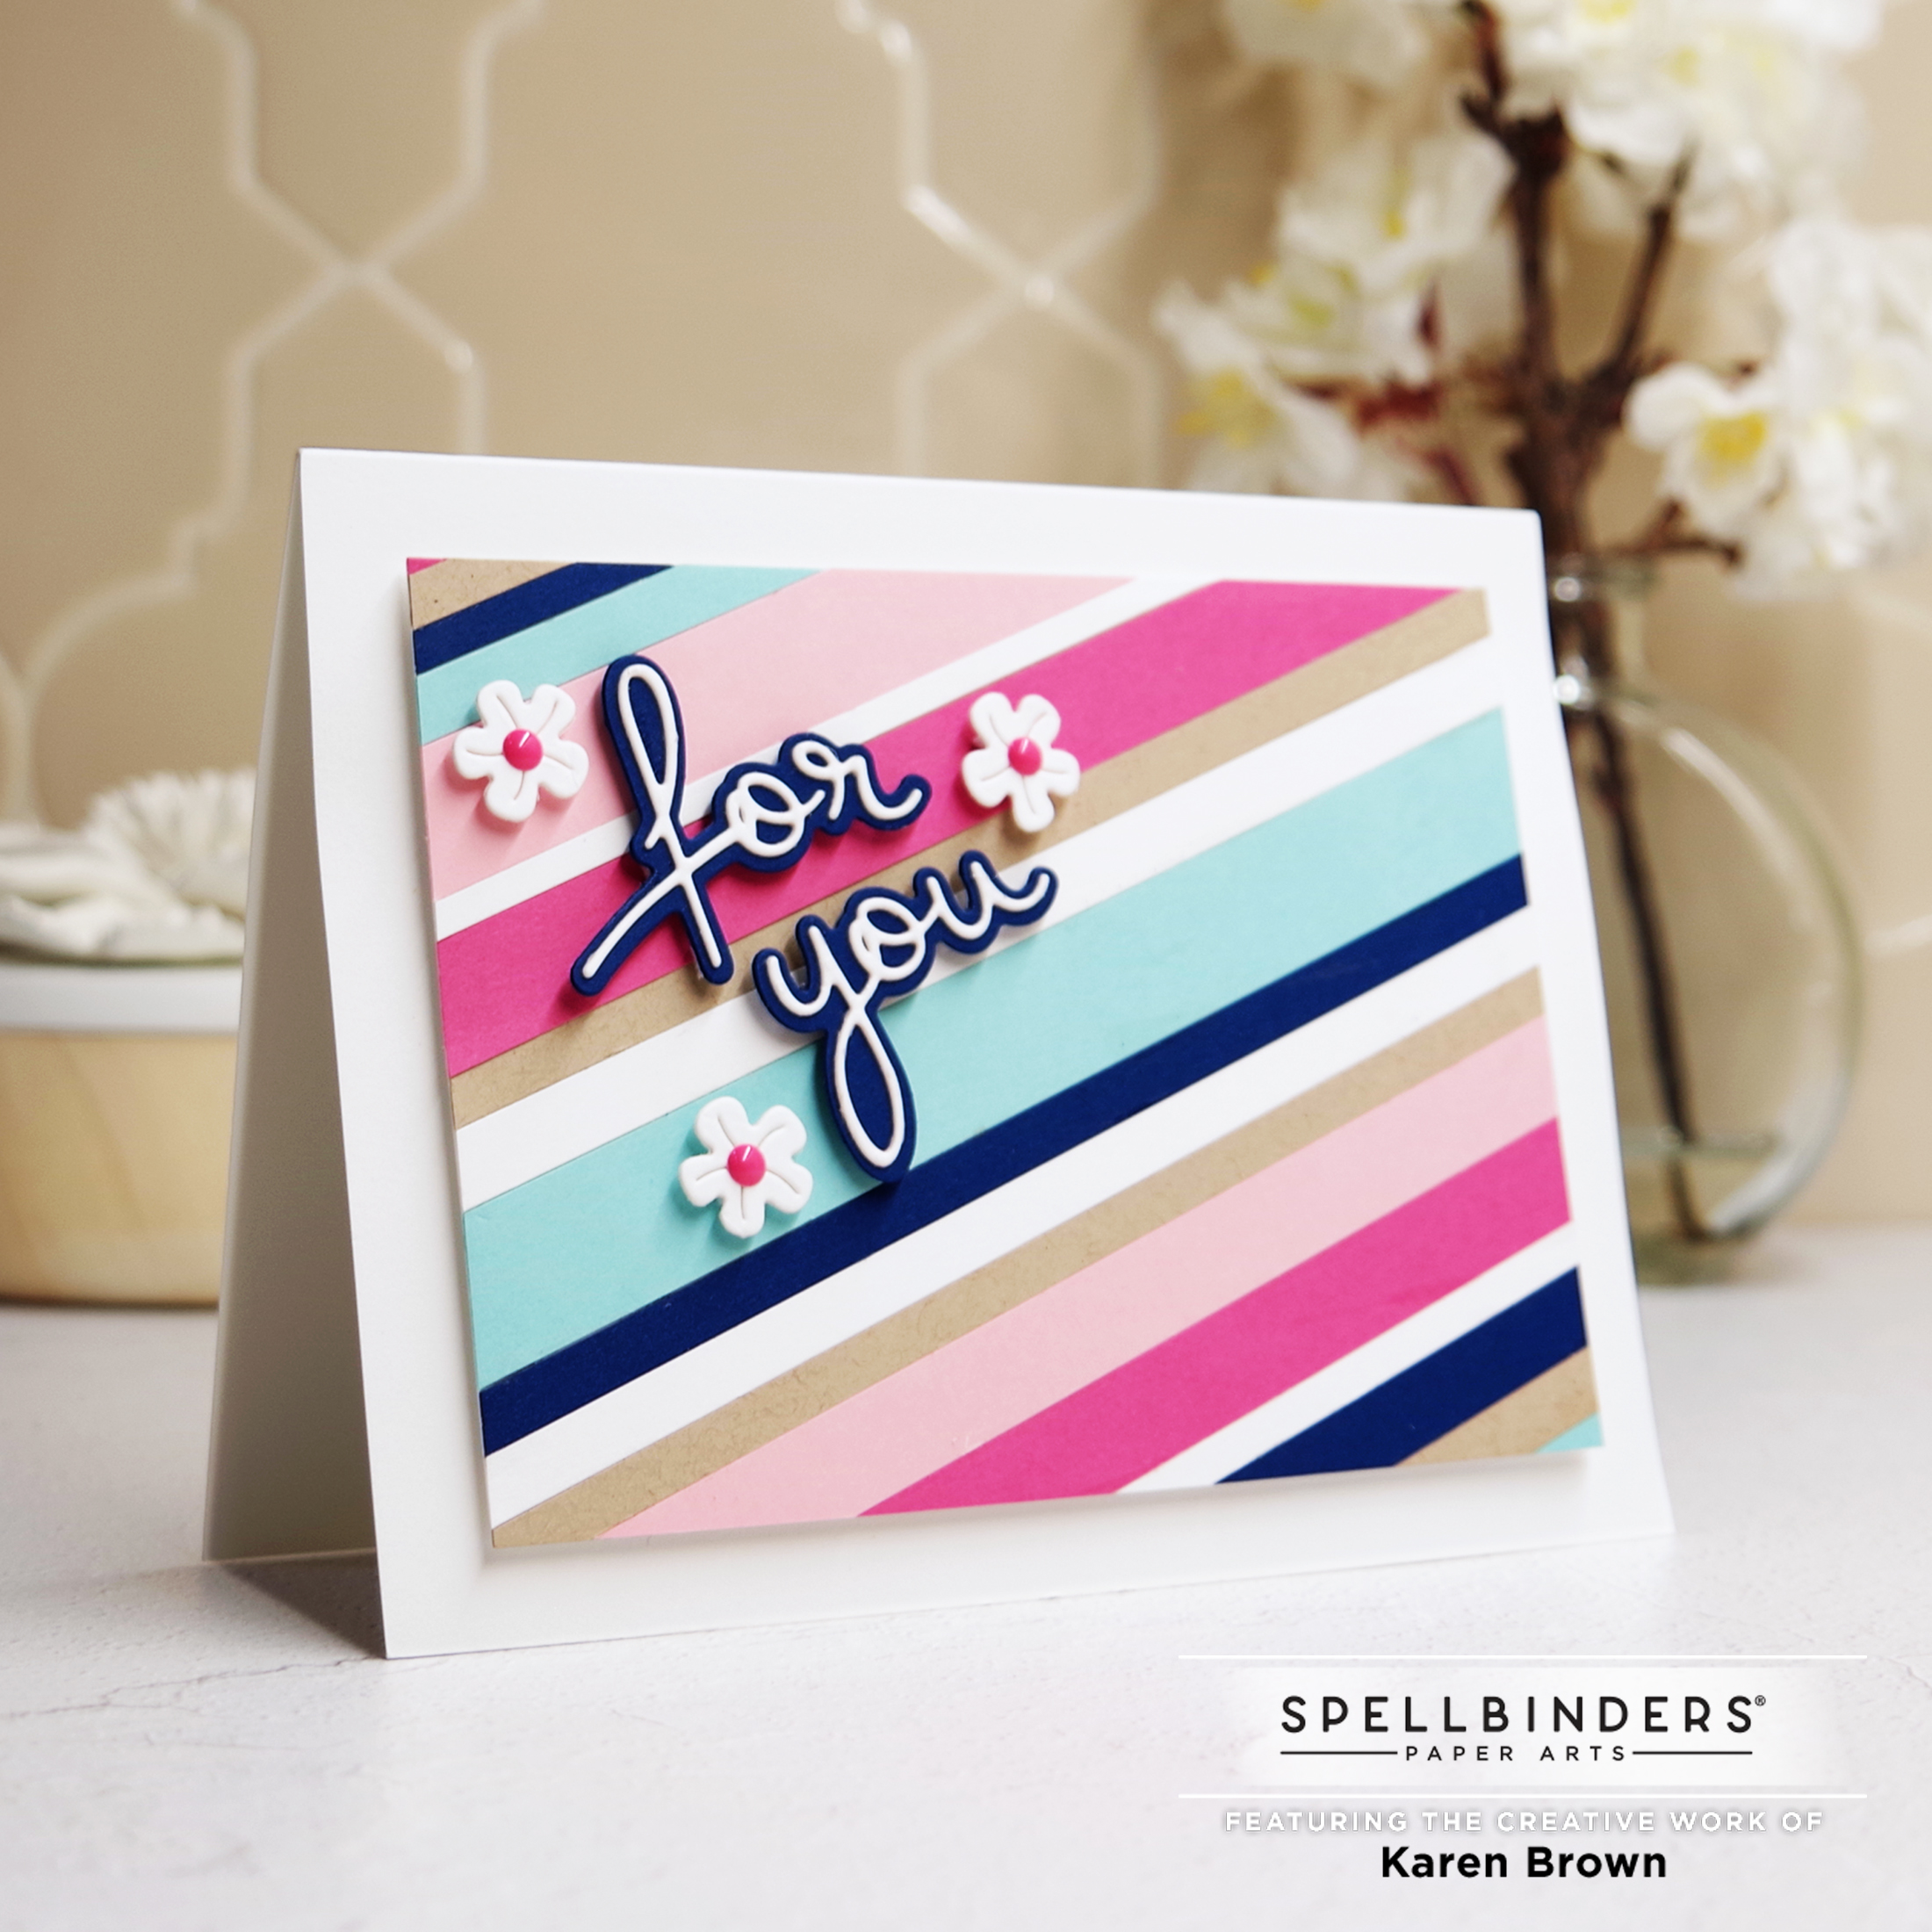 Handmade card with striped background in pink, white, aqua, blue and tan kraft paper cardstock. 